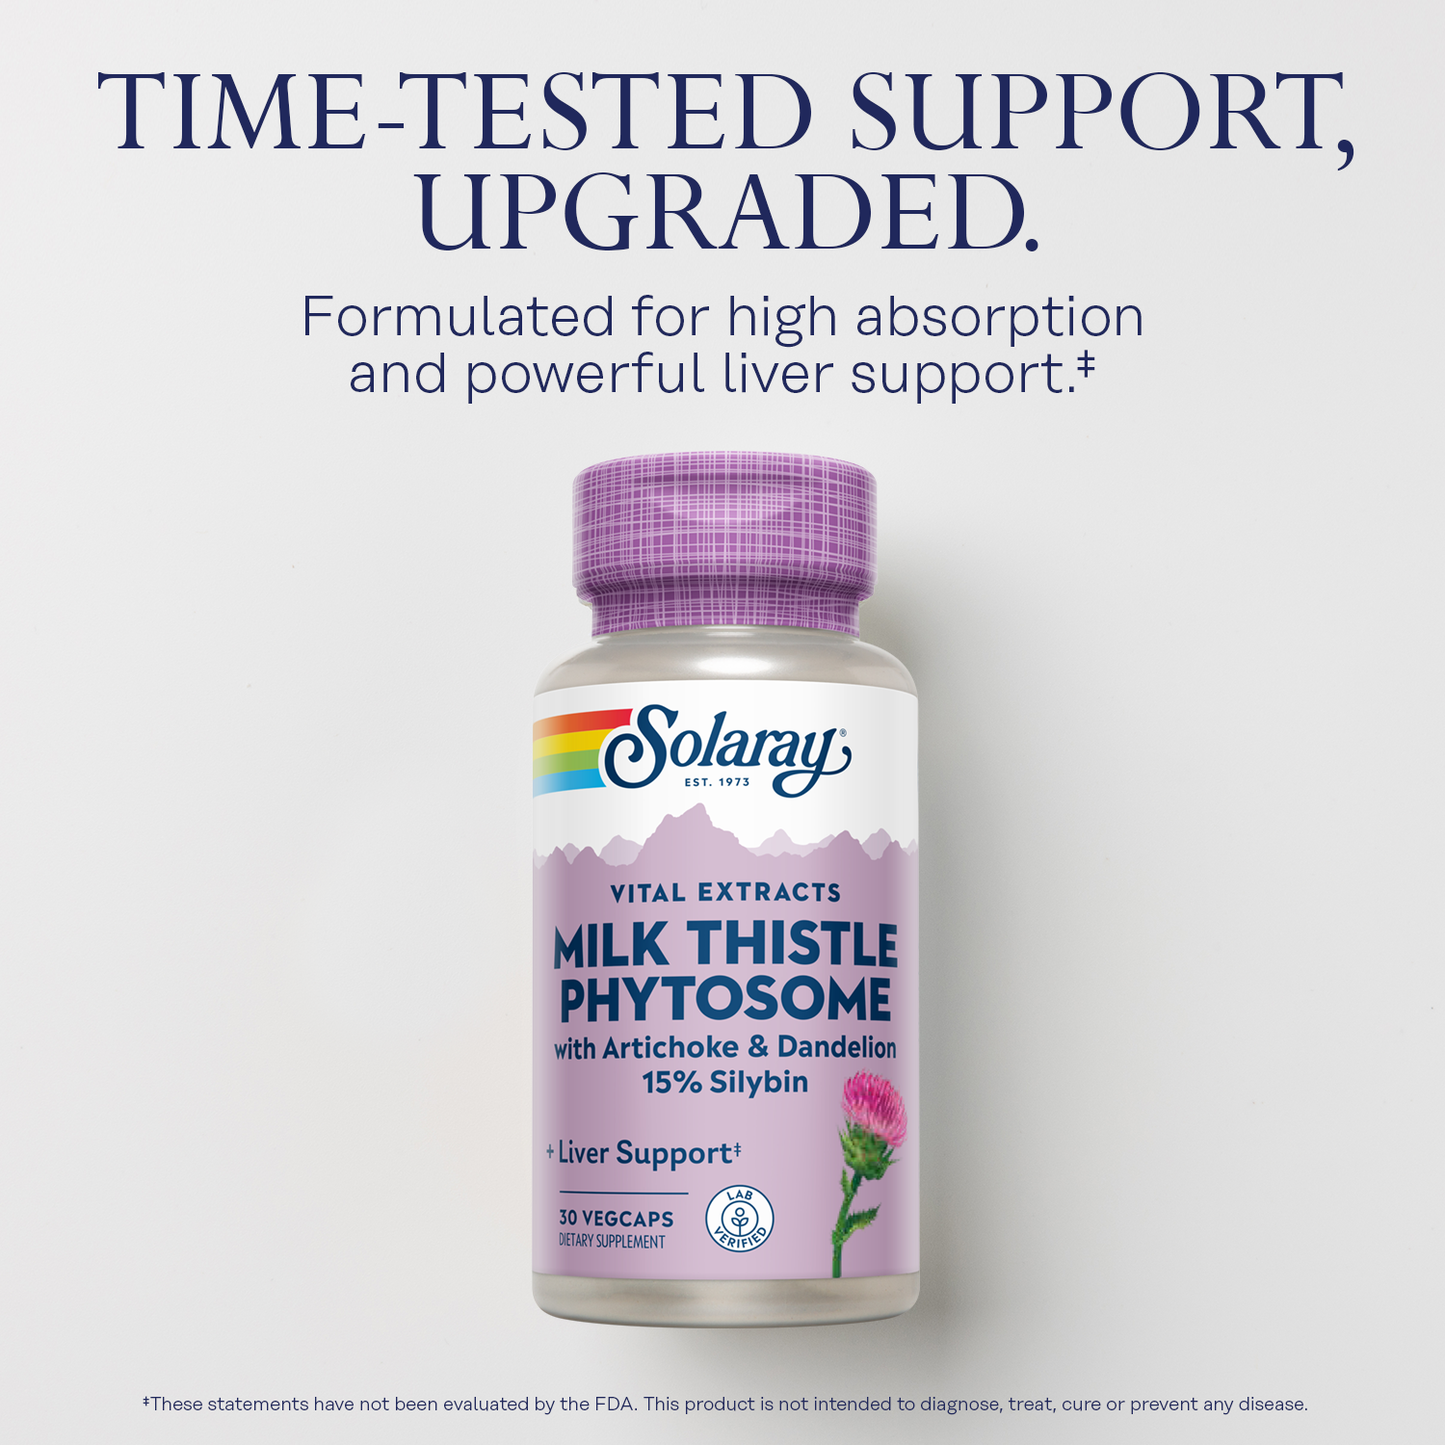 Solaray Milk Thistle Phytosome with Artichoke, Dandelion, and Ginger - Milk Thistle Extract Supplying 15% Silybin - Liver Supplement - 60-Day Guarantee, Lab Verified - 30 Servings, 30 VegCaps